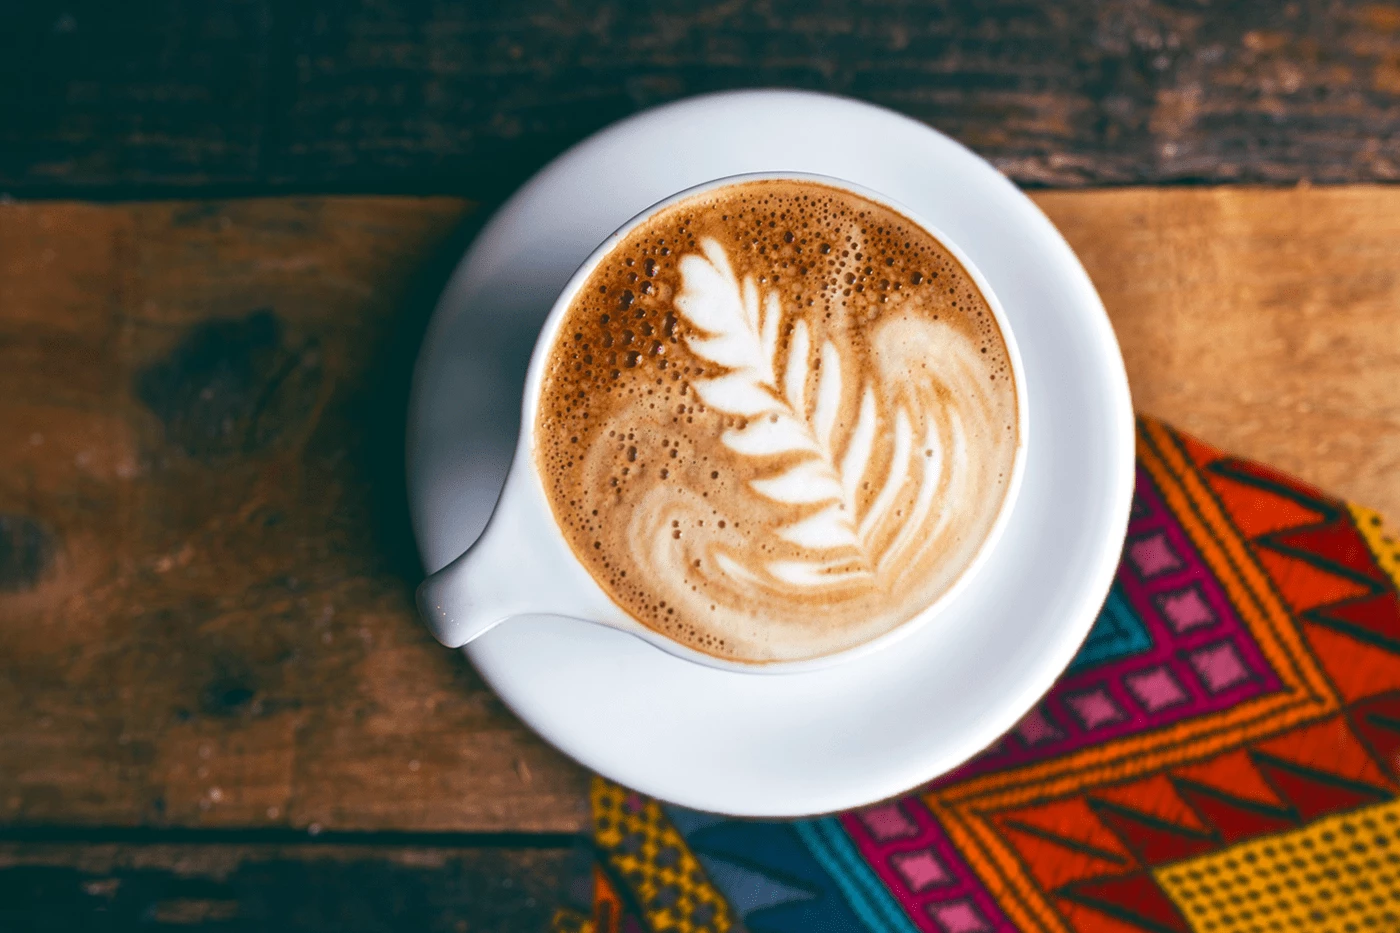 https://perfectdailygrind.com/wp-content/uploads/2019/11/Cappuccino-1.png